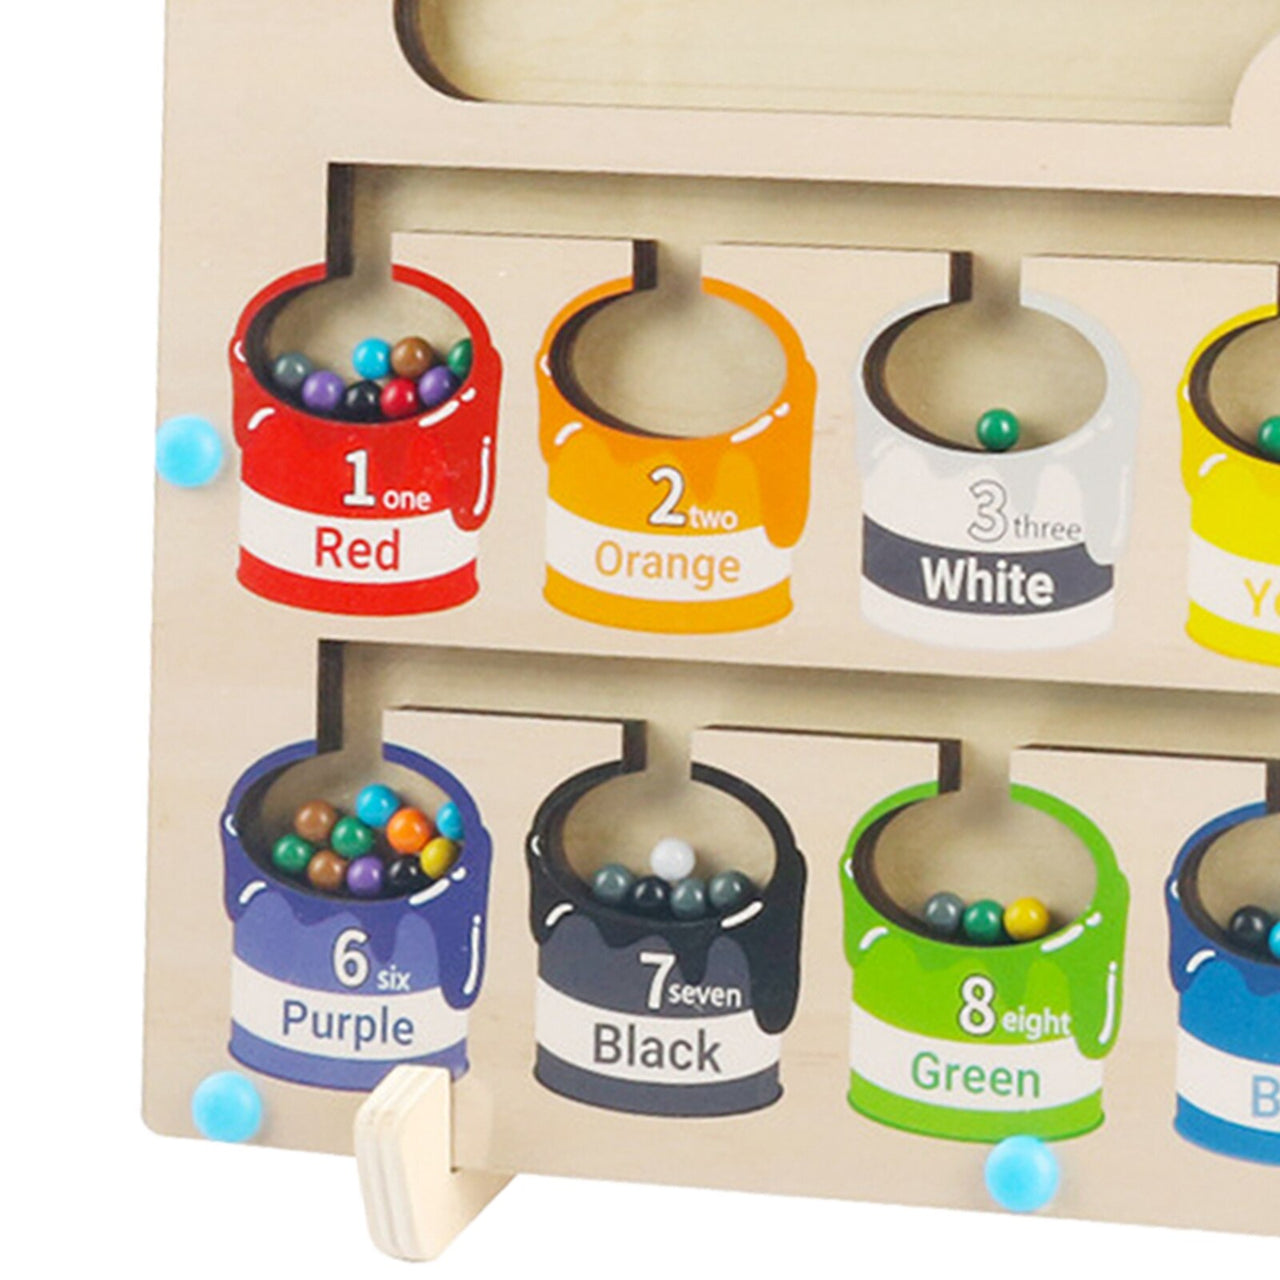 🔥LAST DAY 51% OFF 🔥Magnetic Color and Number Maze Learning Education Toys